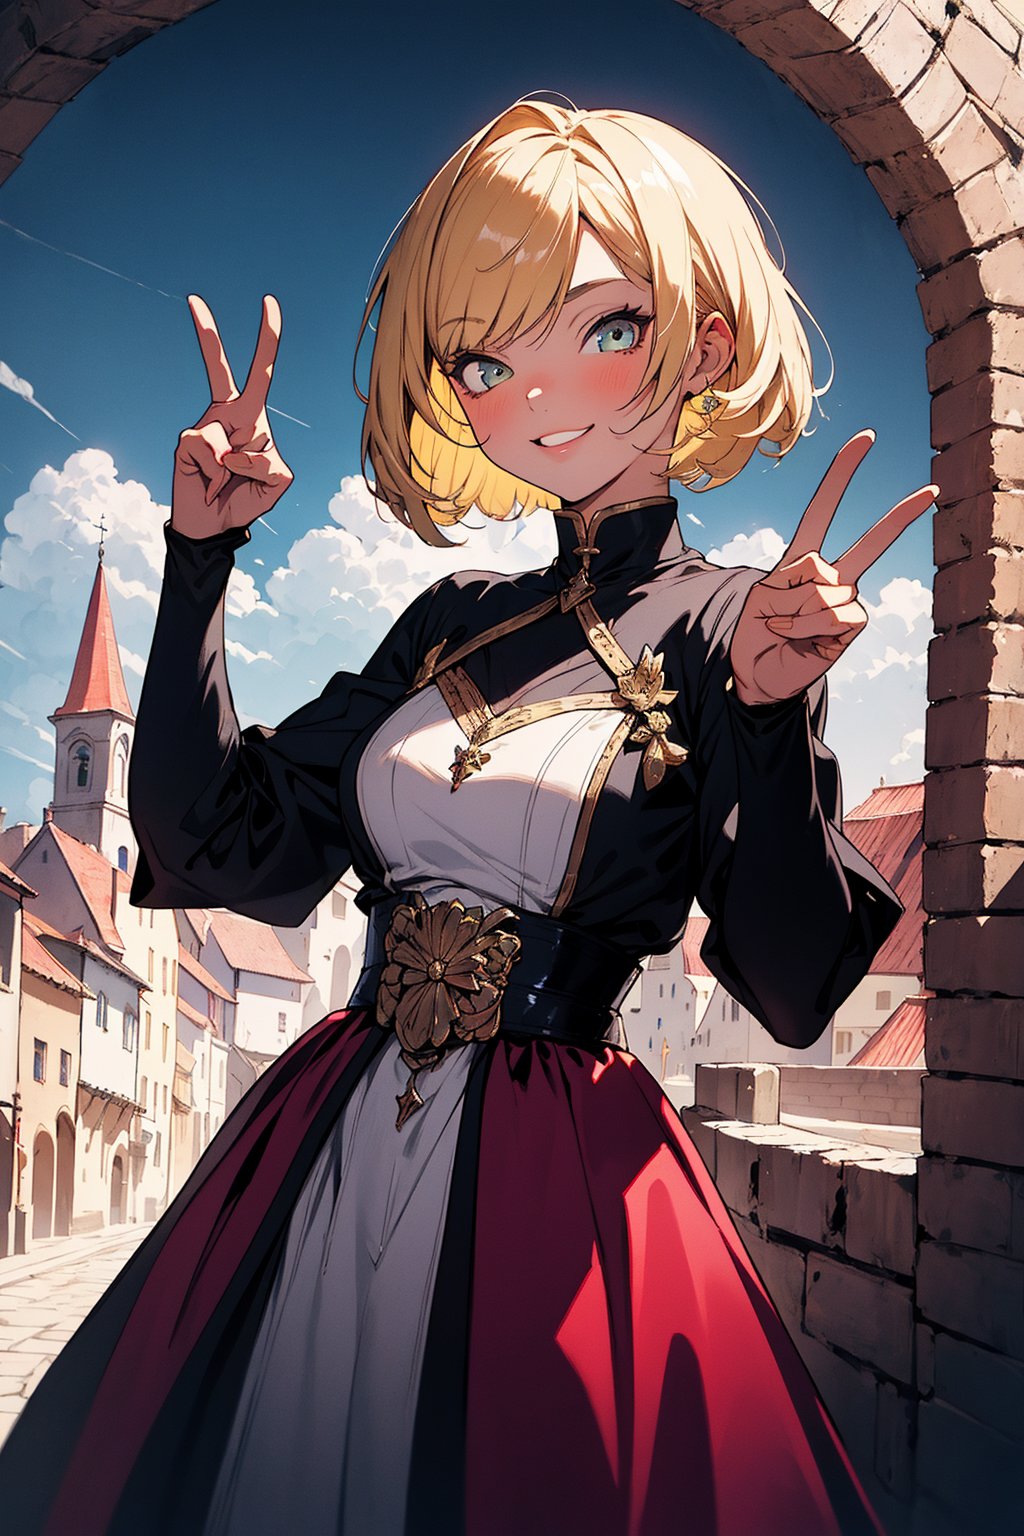 Absurd, High resolution, Super detailed, (1 girl: 1.3), wink,peace signs, Blonde hair, Bob hair, Summer Dress, Medieval European town, Surreal scenery,Fantastic glow, Vibrant color